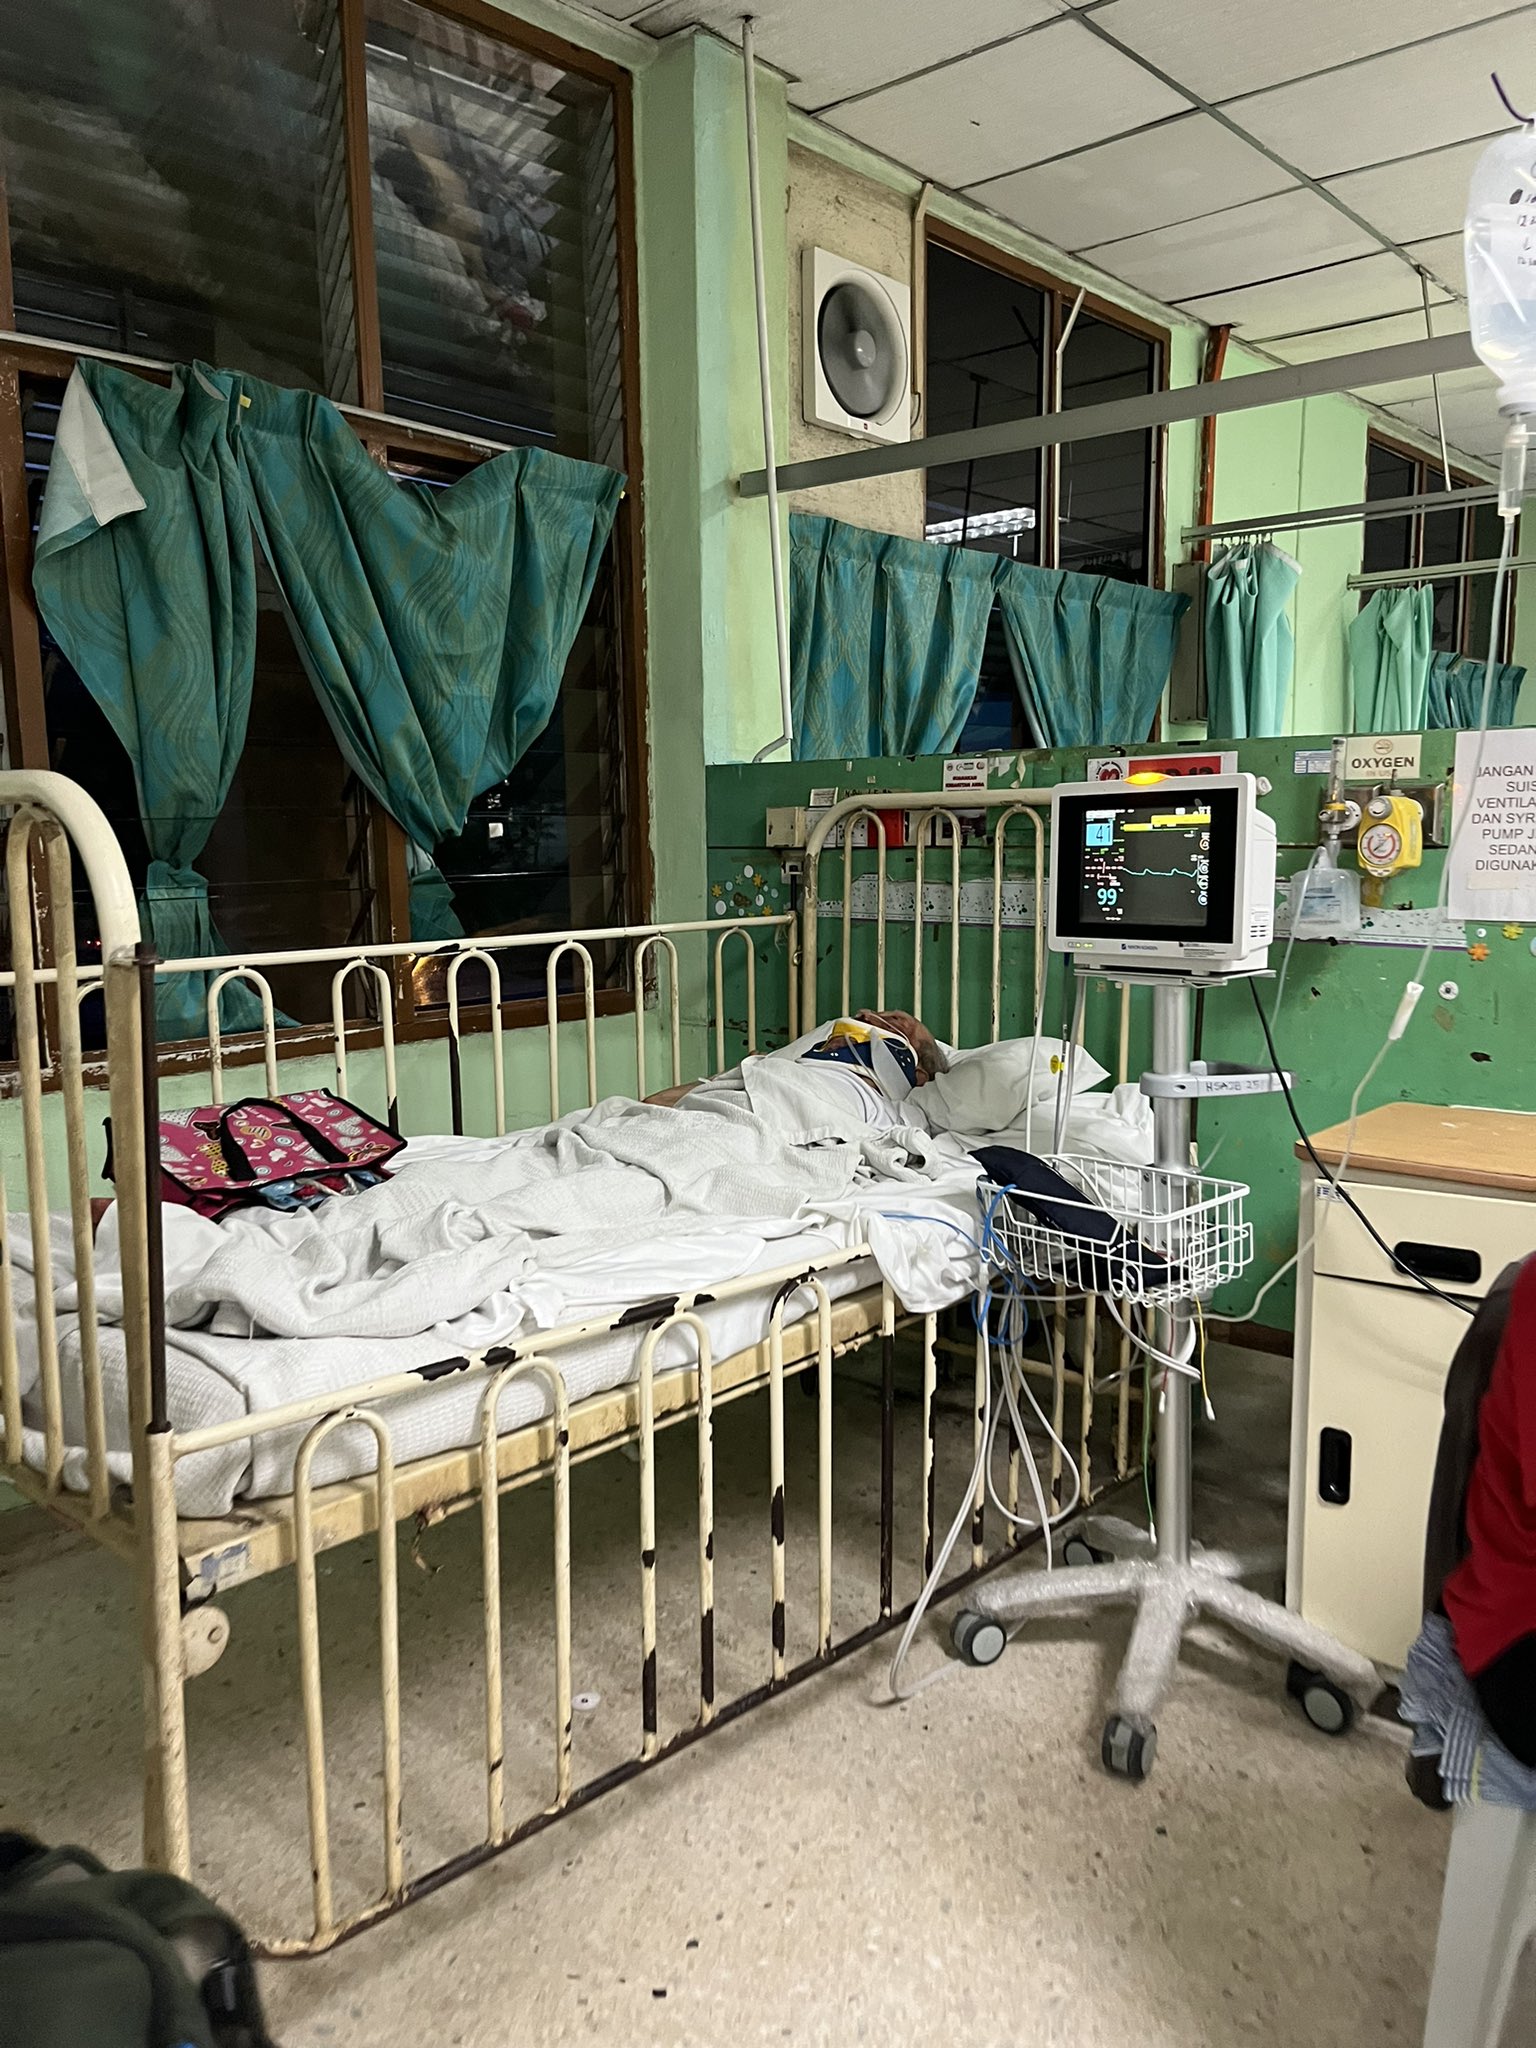 Msian woman's grandfather at a government hospital.